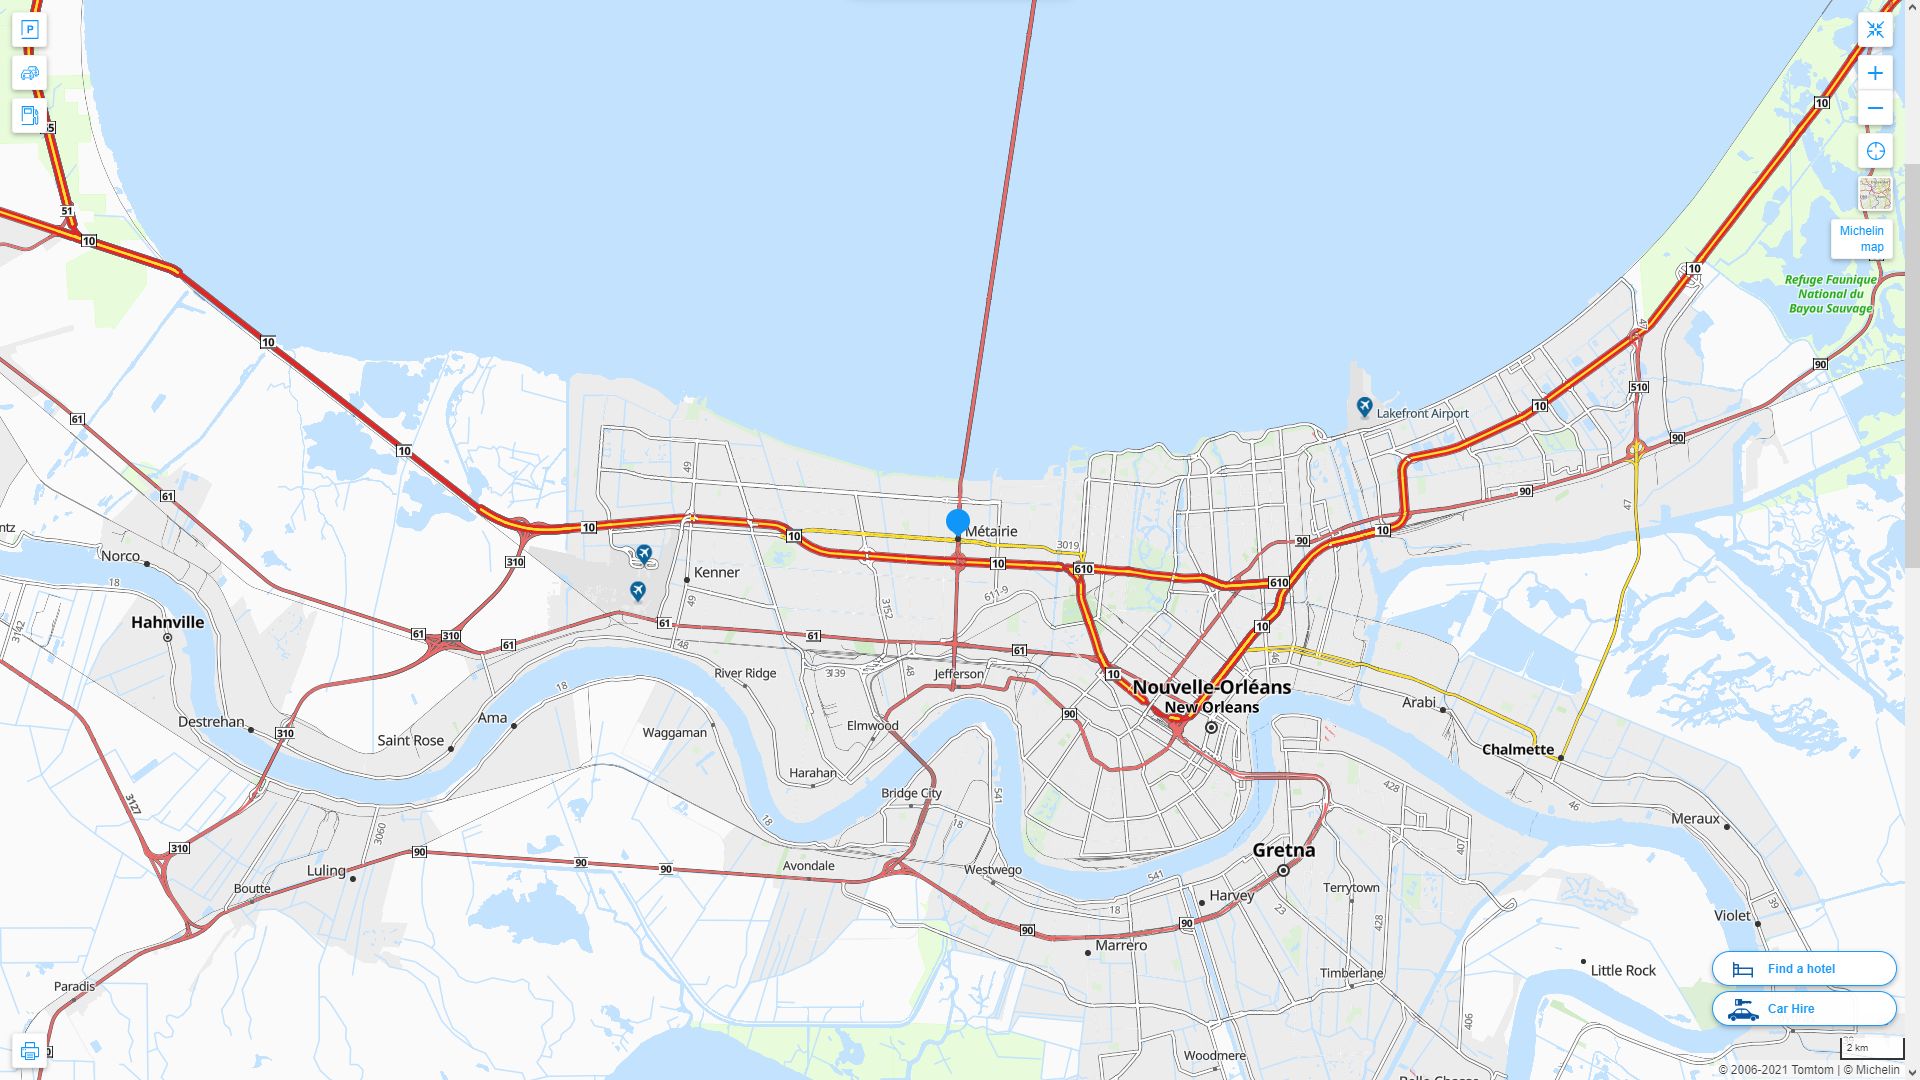 Metairie Louisiana Highway and Road Map